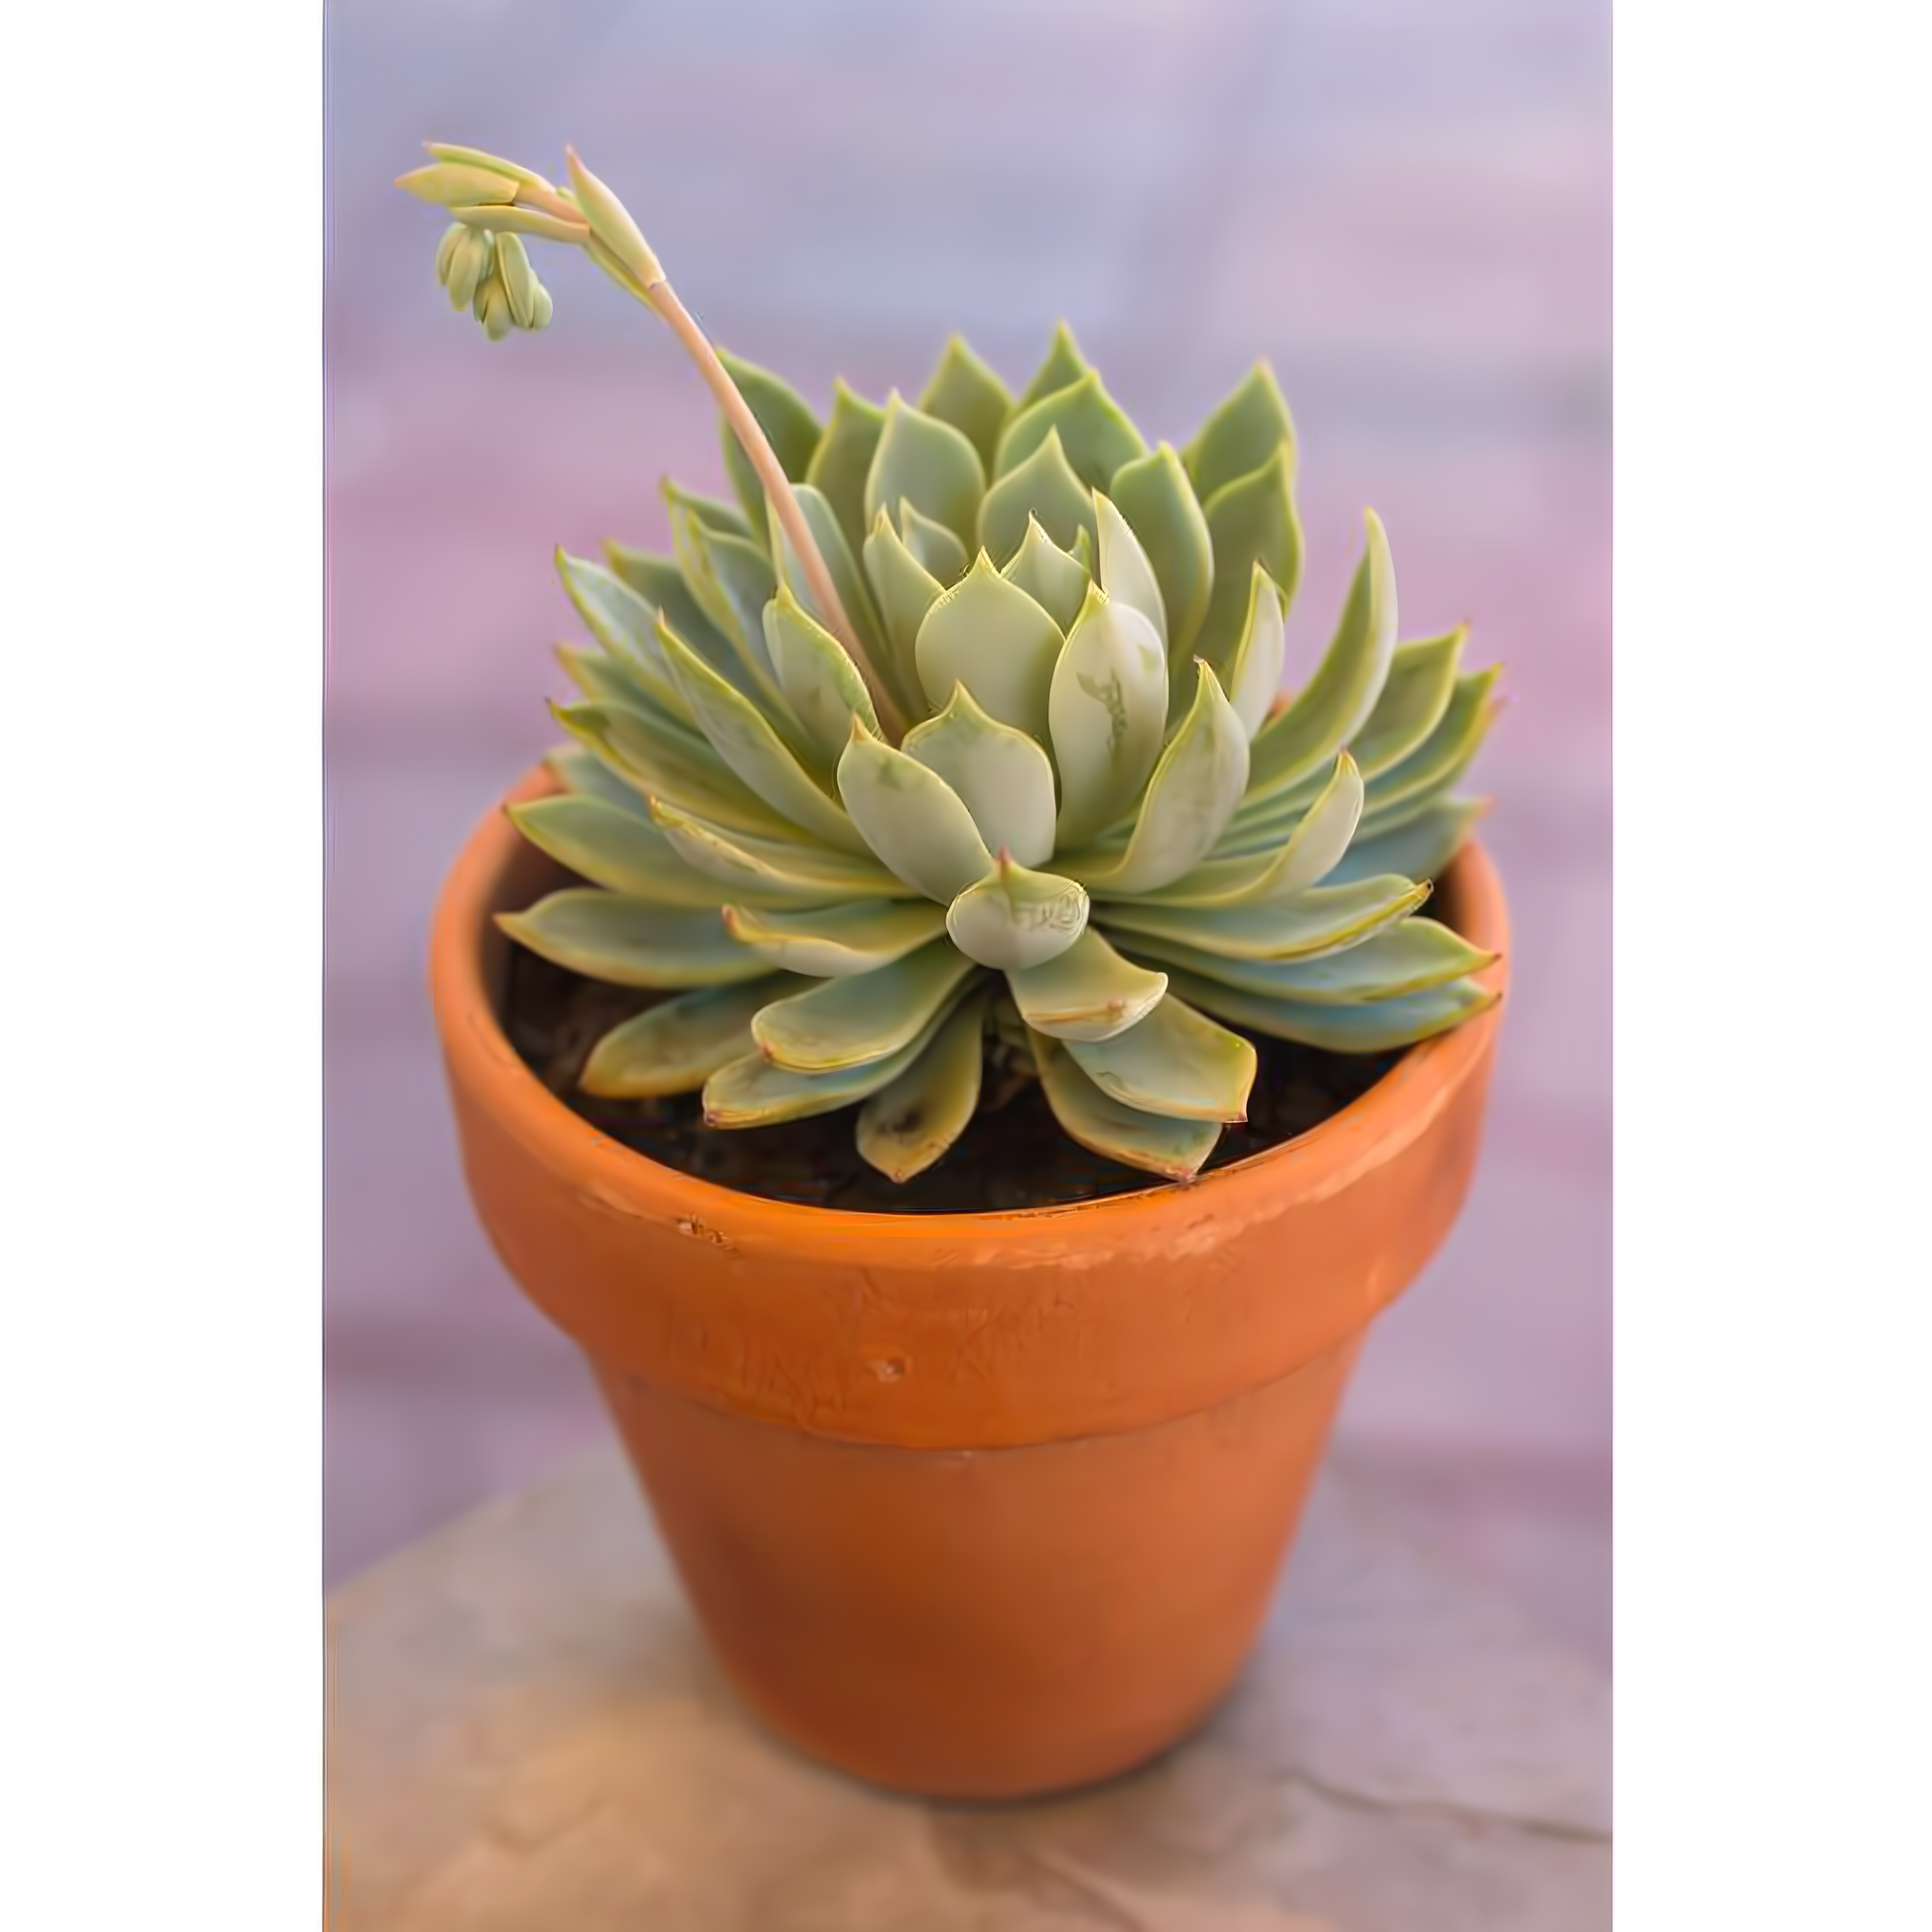 NYC Flower Delivery - ECHEVERIA SUCCULENT 6" IN CLAY POT - Plants